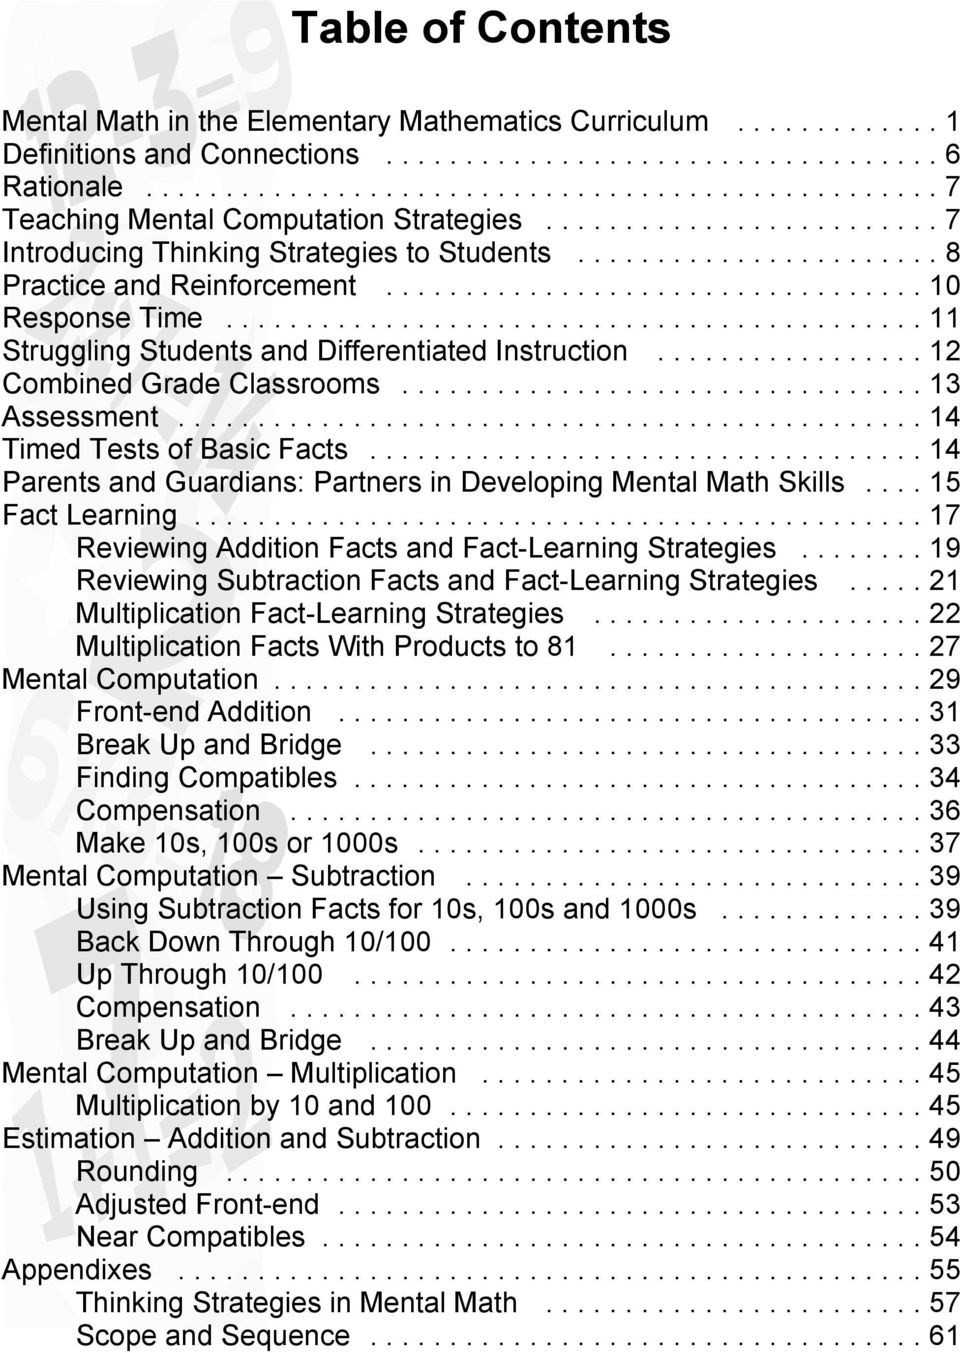 ..14 Timed Tests of Basic Facts...14 Parents and Guardians: Partners in Developing Mental Math Skills...15 Fact Learning...17 Reviewing Addition Facts and Fact-Learning Strategies.